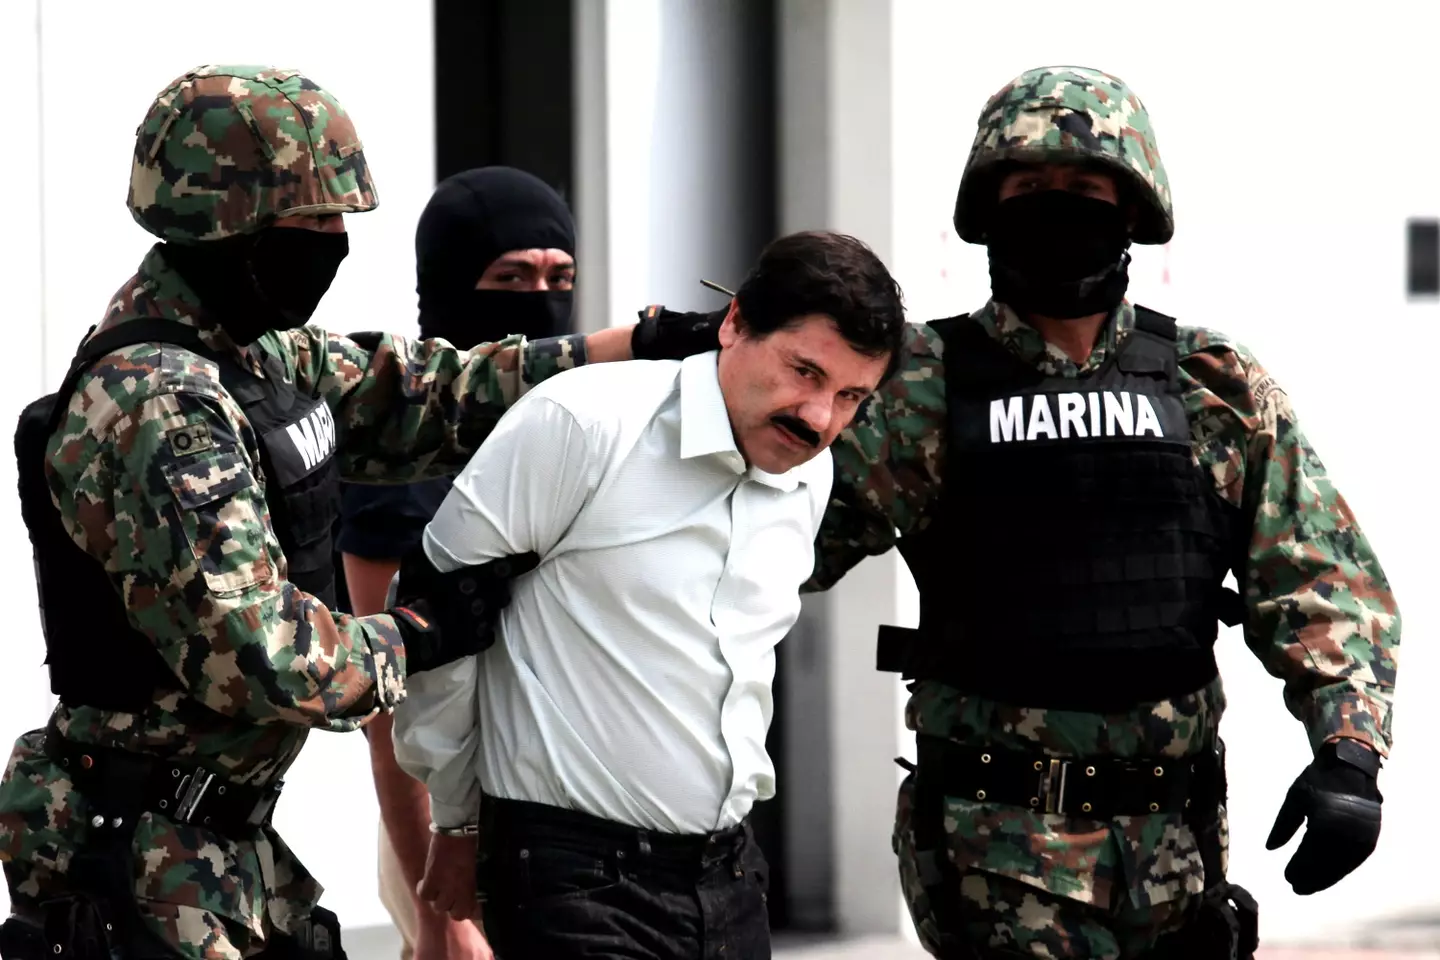 El Chapo is serving a 30-year-sentence.